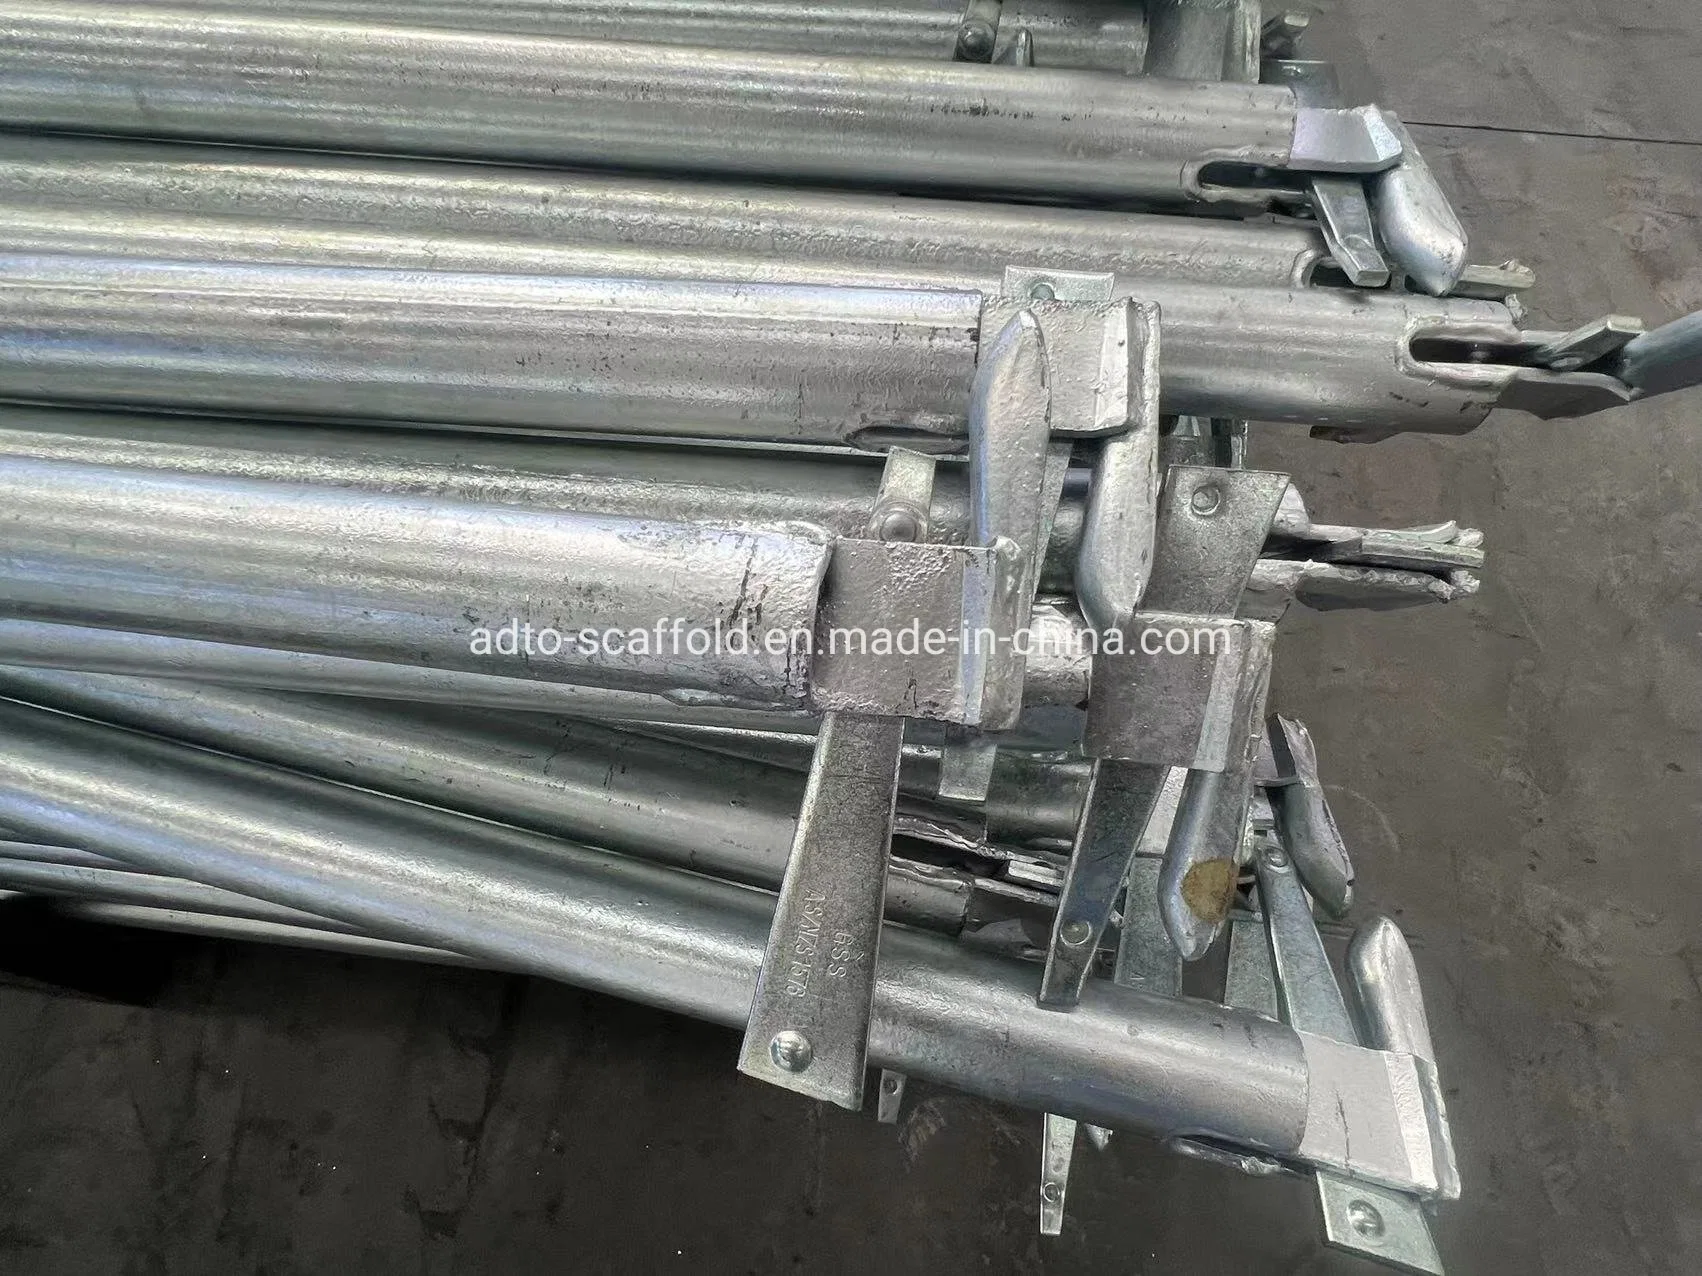 Hot Sale Cheap Price Painted Q345 Steel Construction Kwikstage Scaffold Metal Tech Scaffold